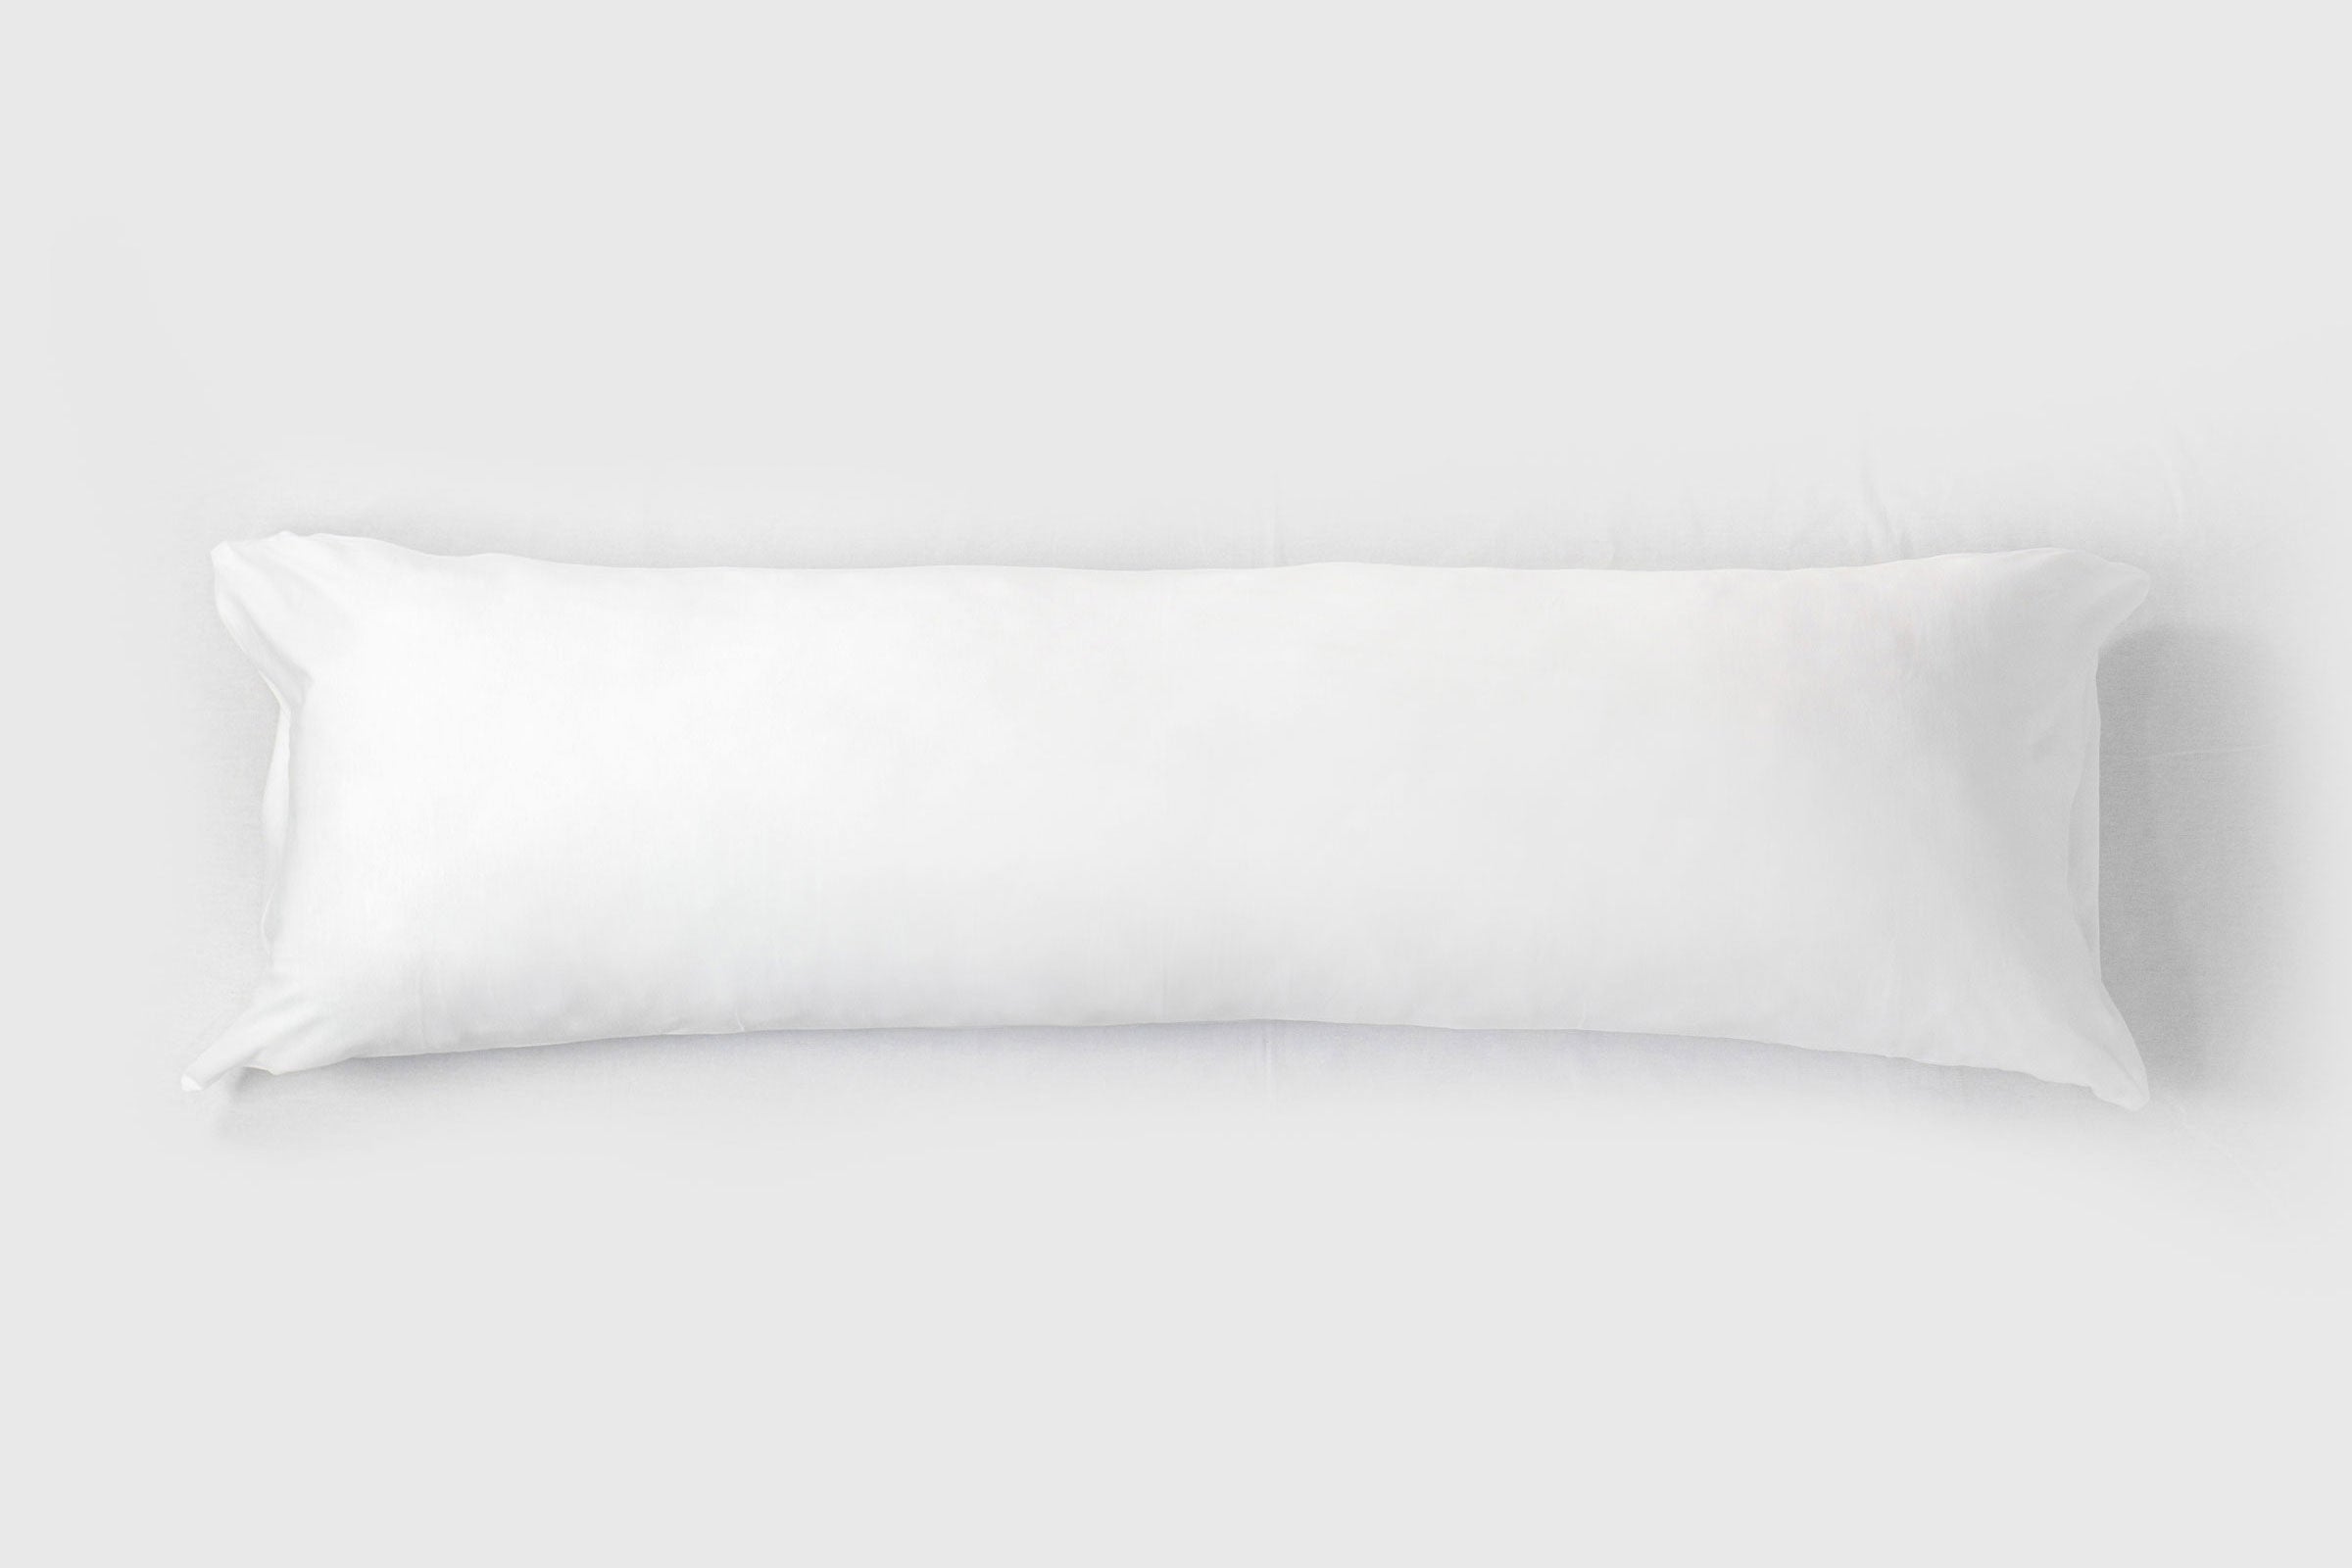 jersey-white-body-pillow-case-by-sojao.jpg